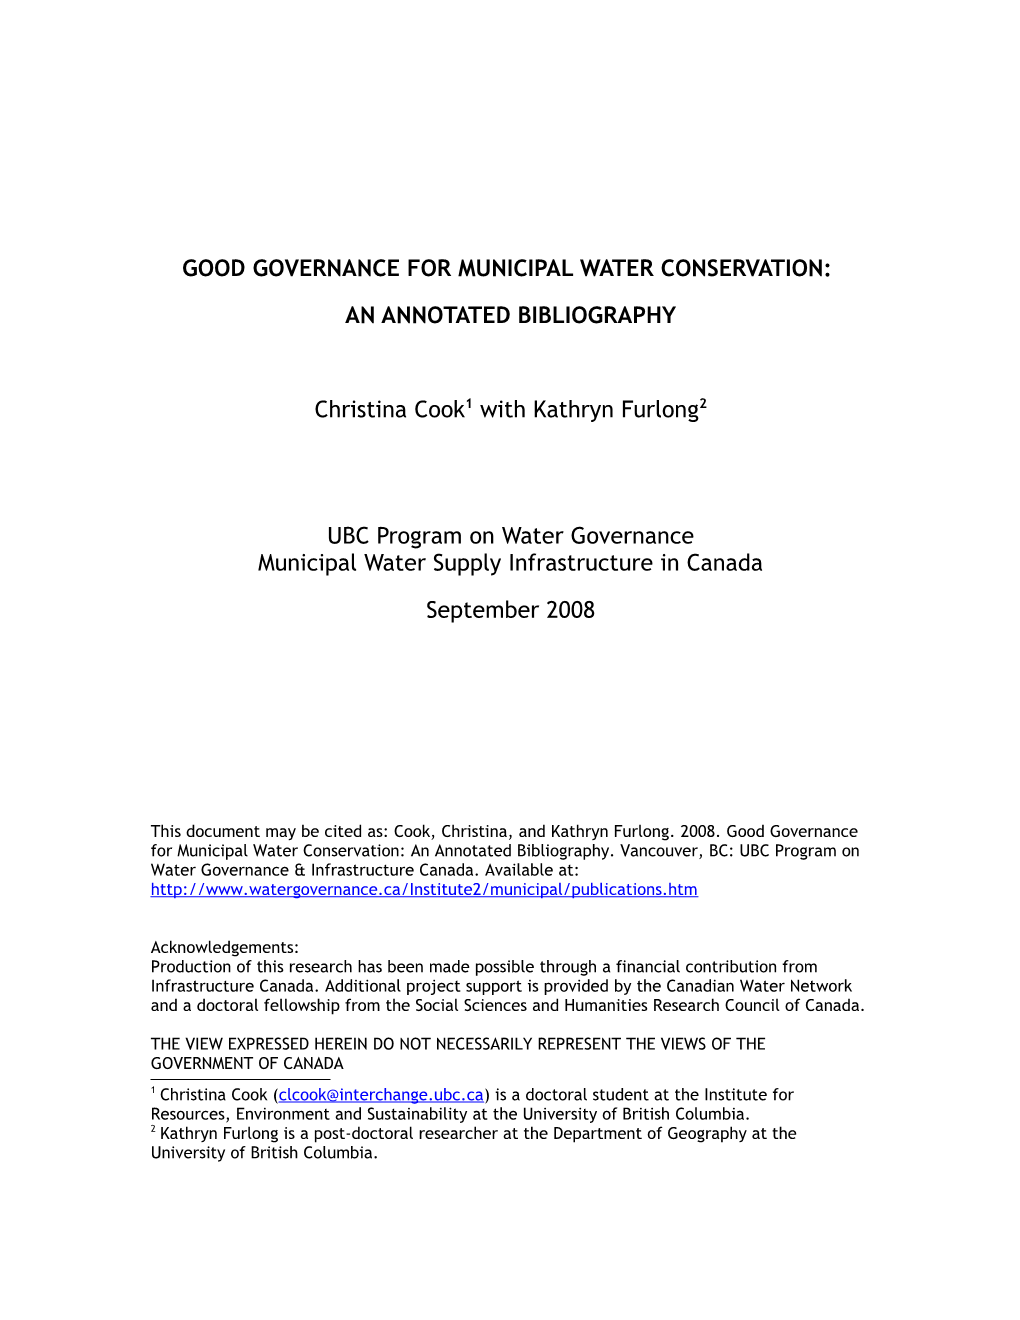 Good Governance for Municipal Water Conservation